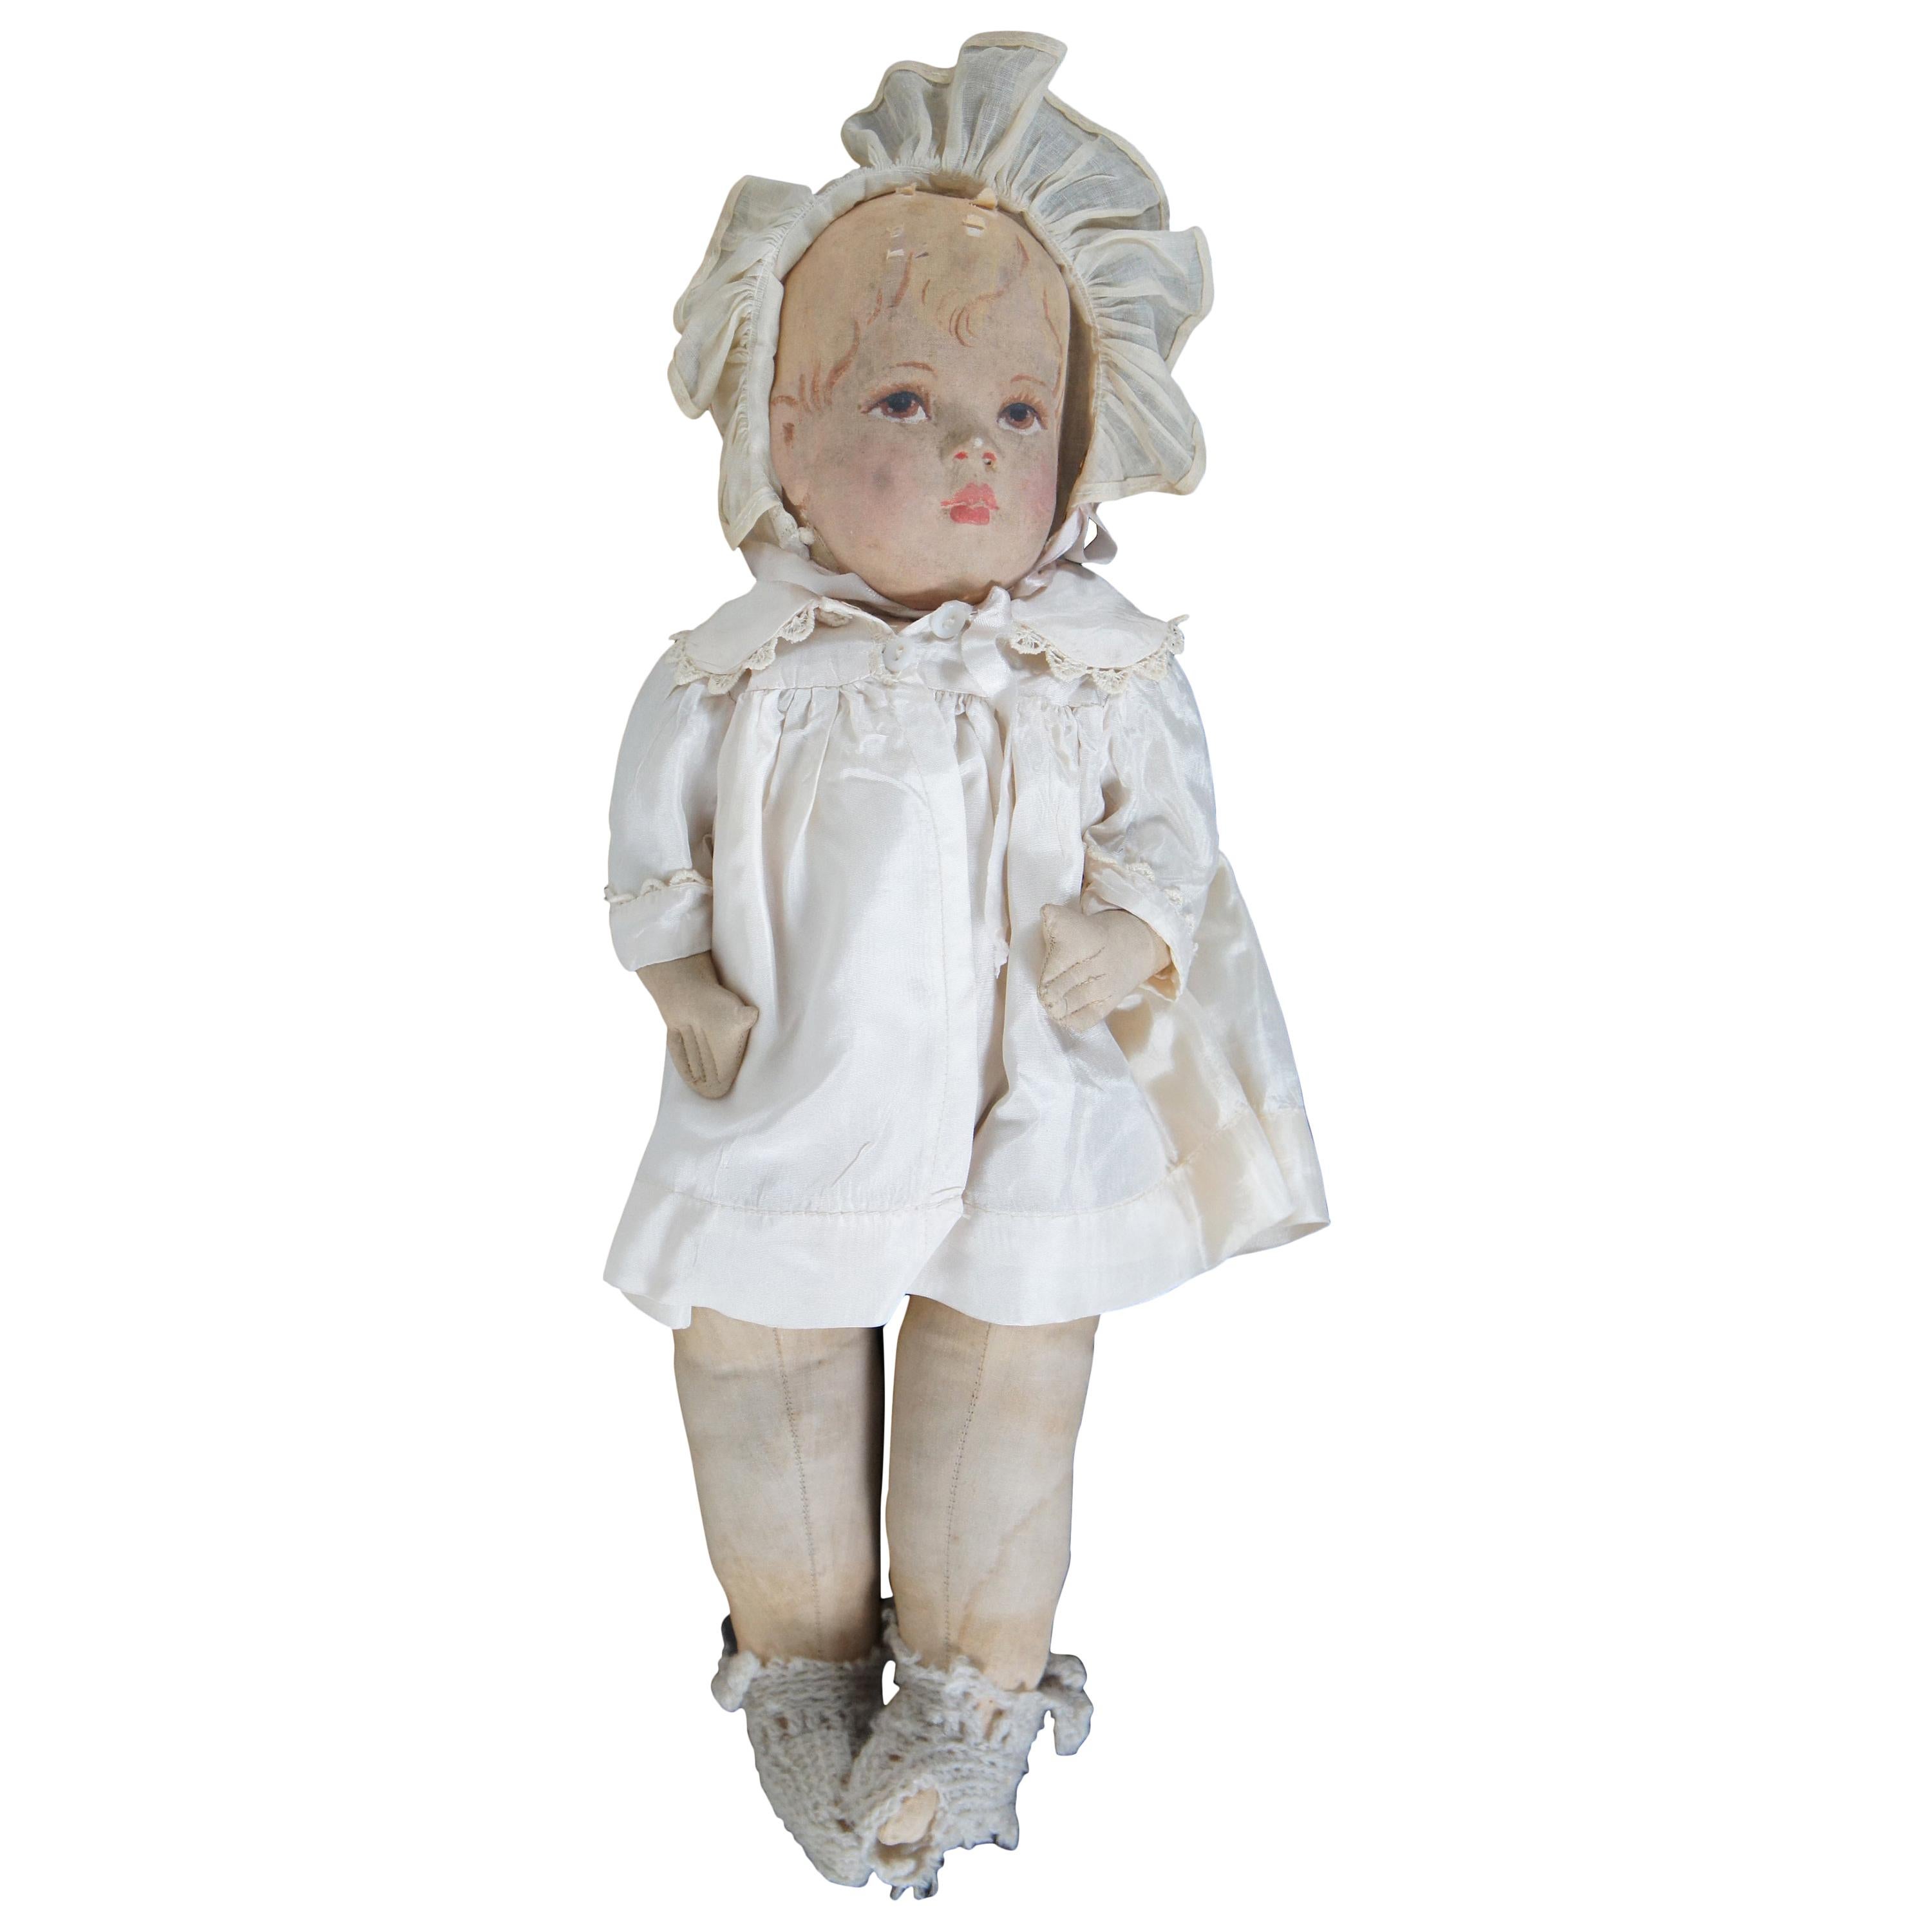 Original Antique Kathe Kruse Painted Cloth Baby Girl Doll, Germany